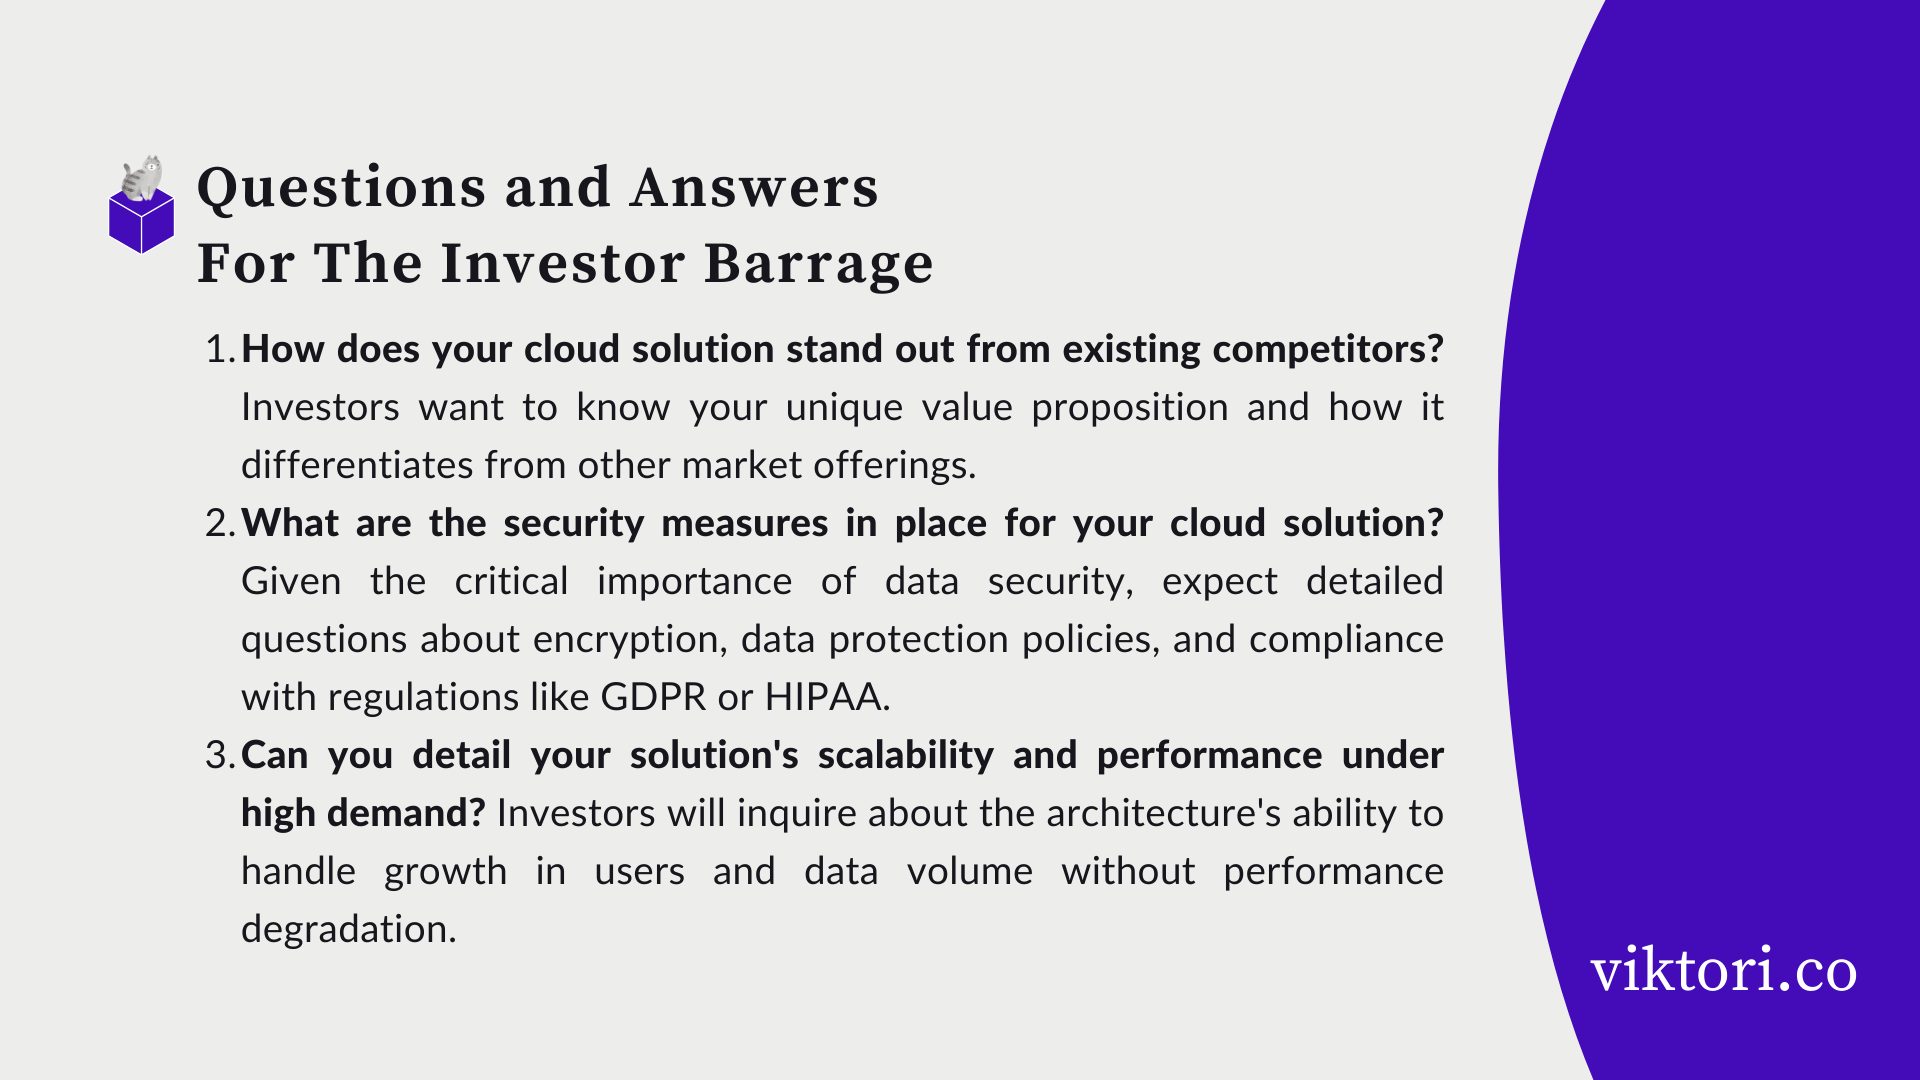 cloud solutions pitch deck: questions and answers